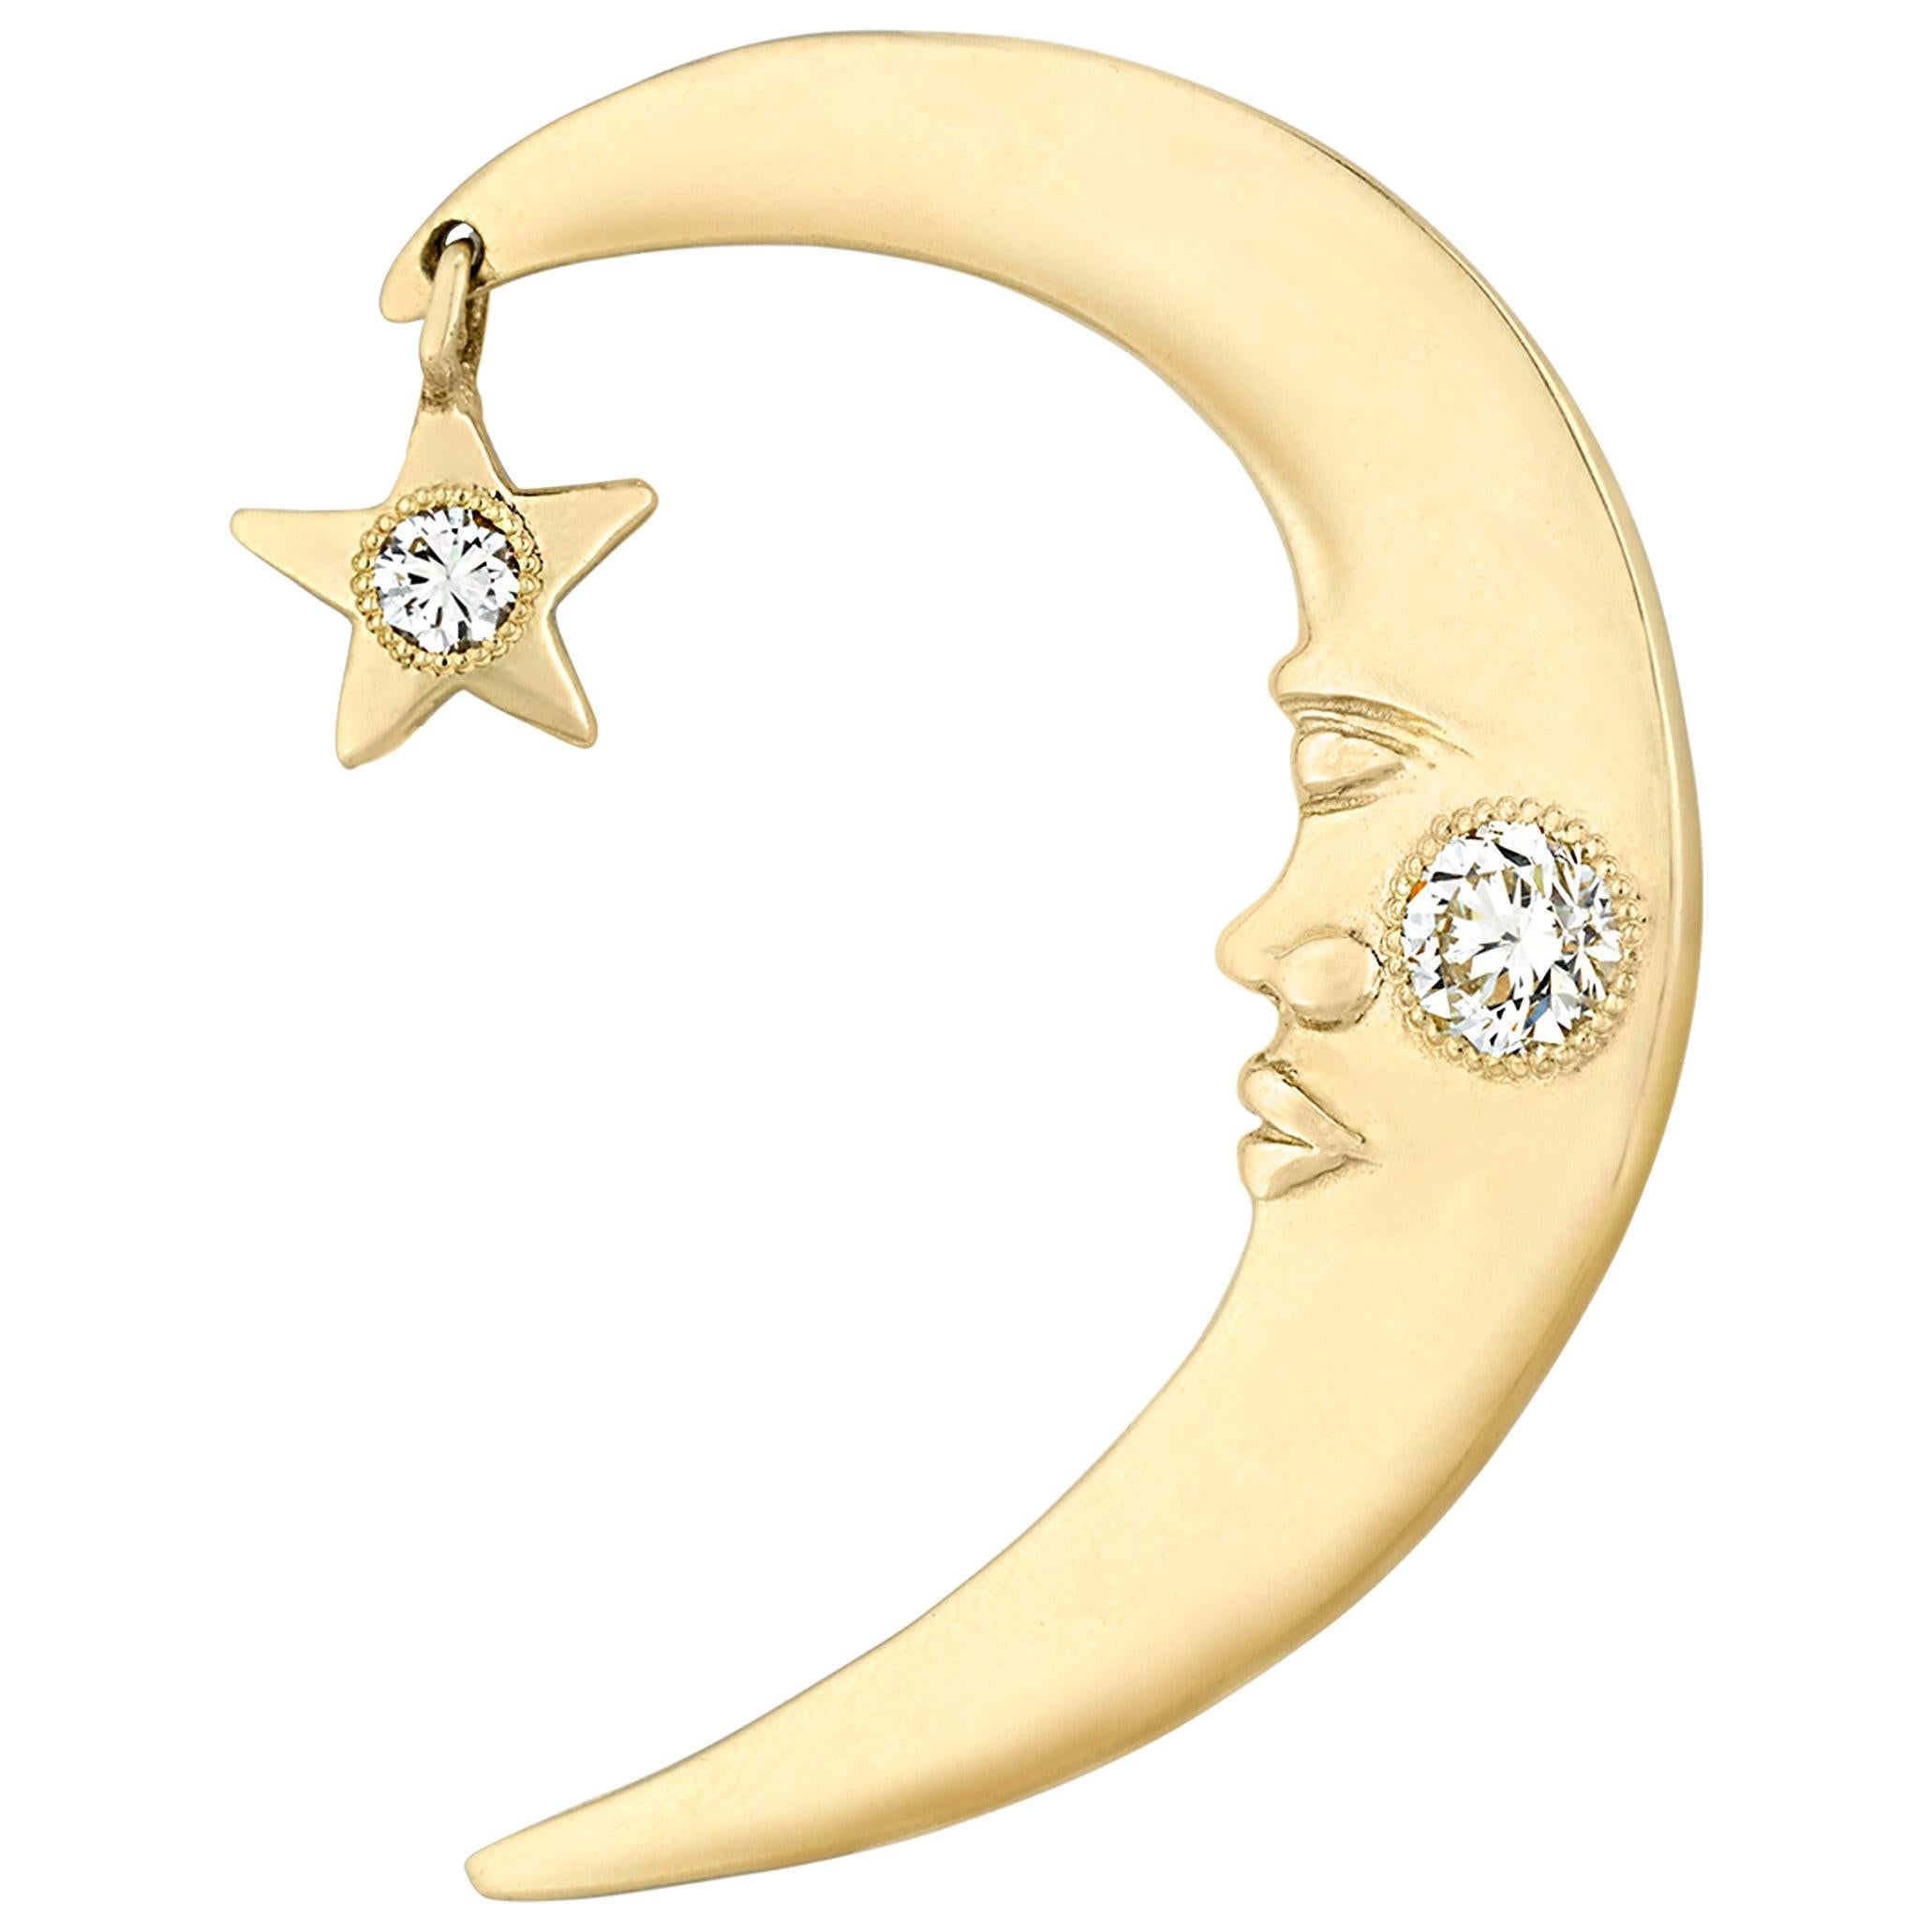 Prince's Gold and Diamond Crescent Moon Ear Cuff